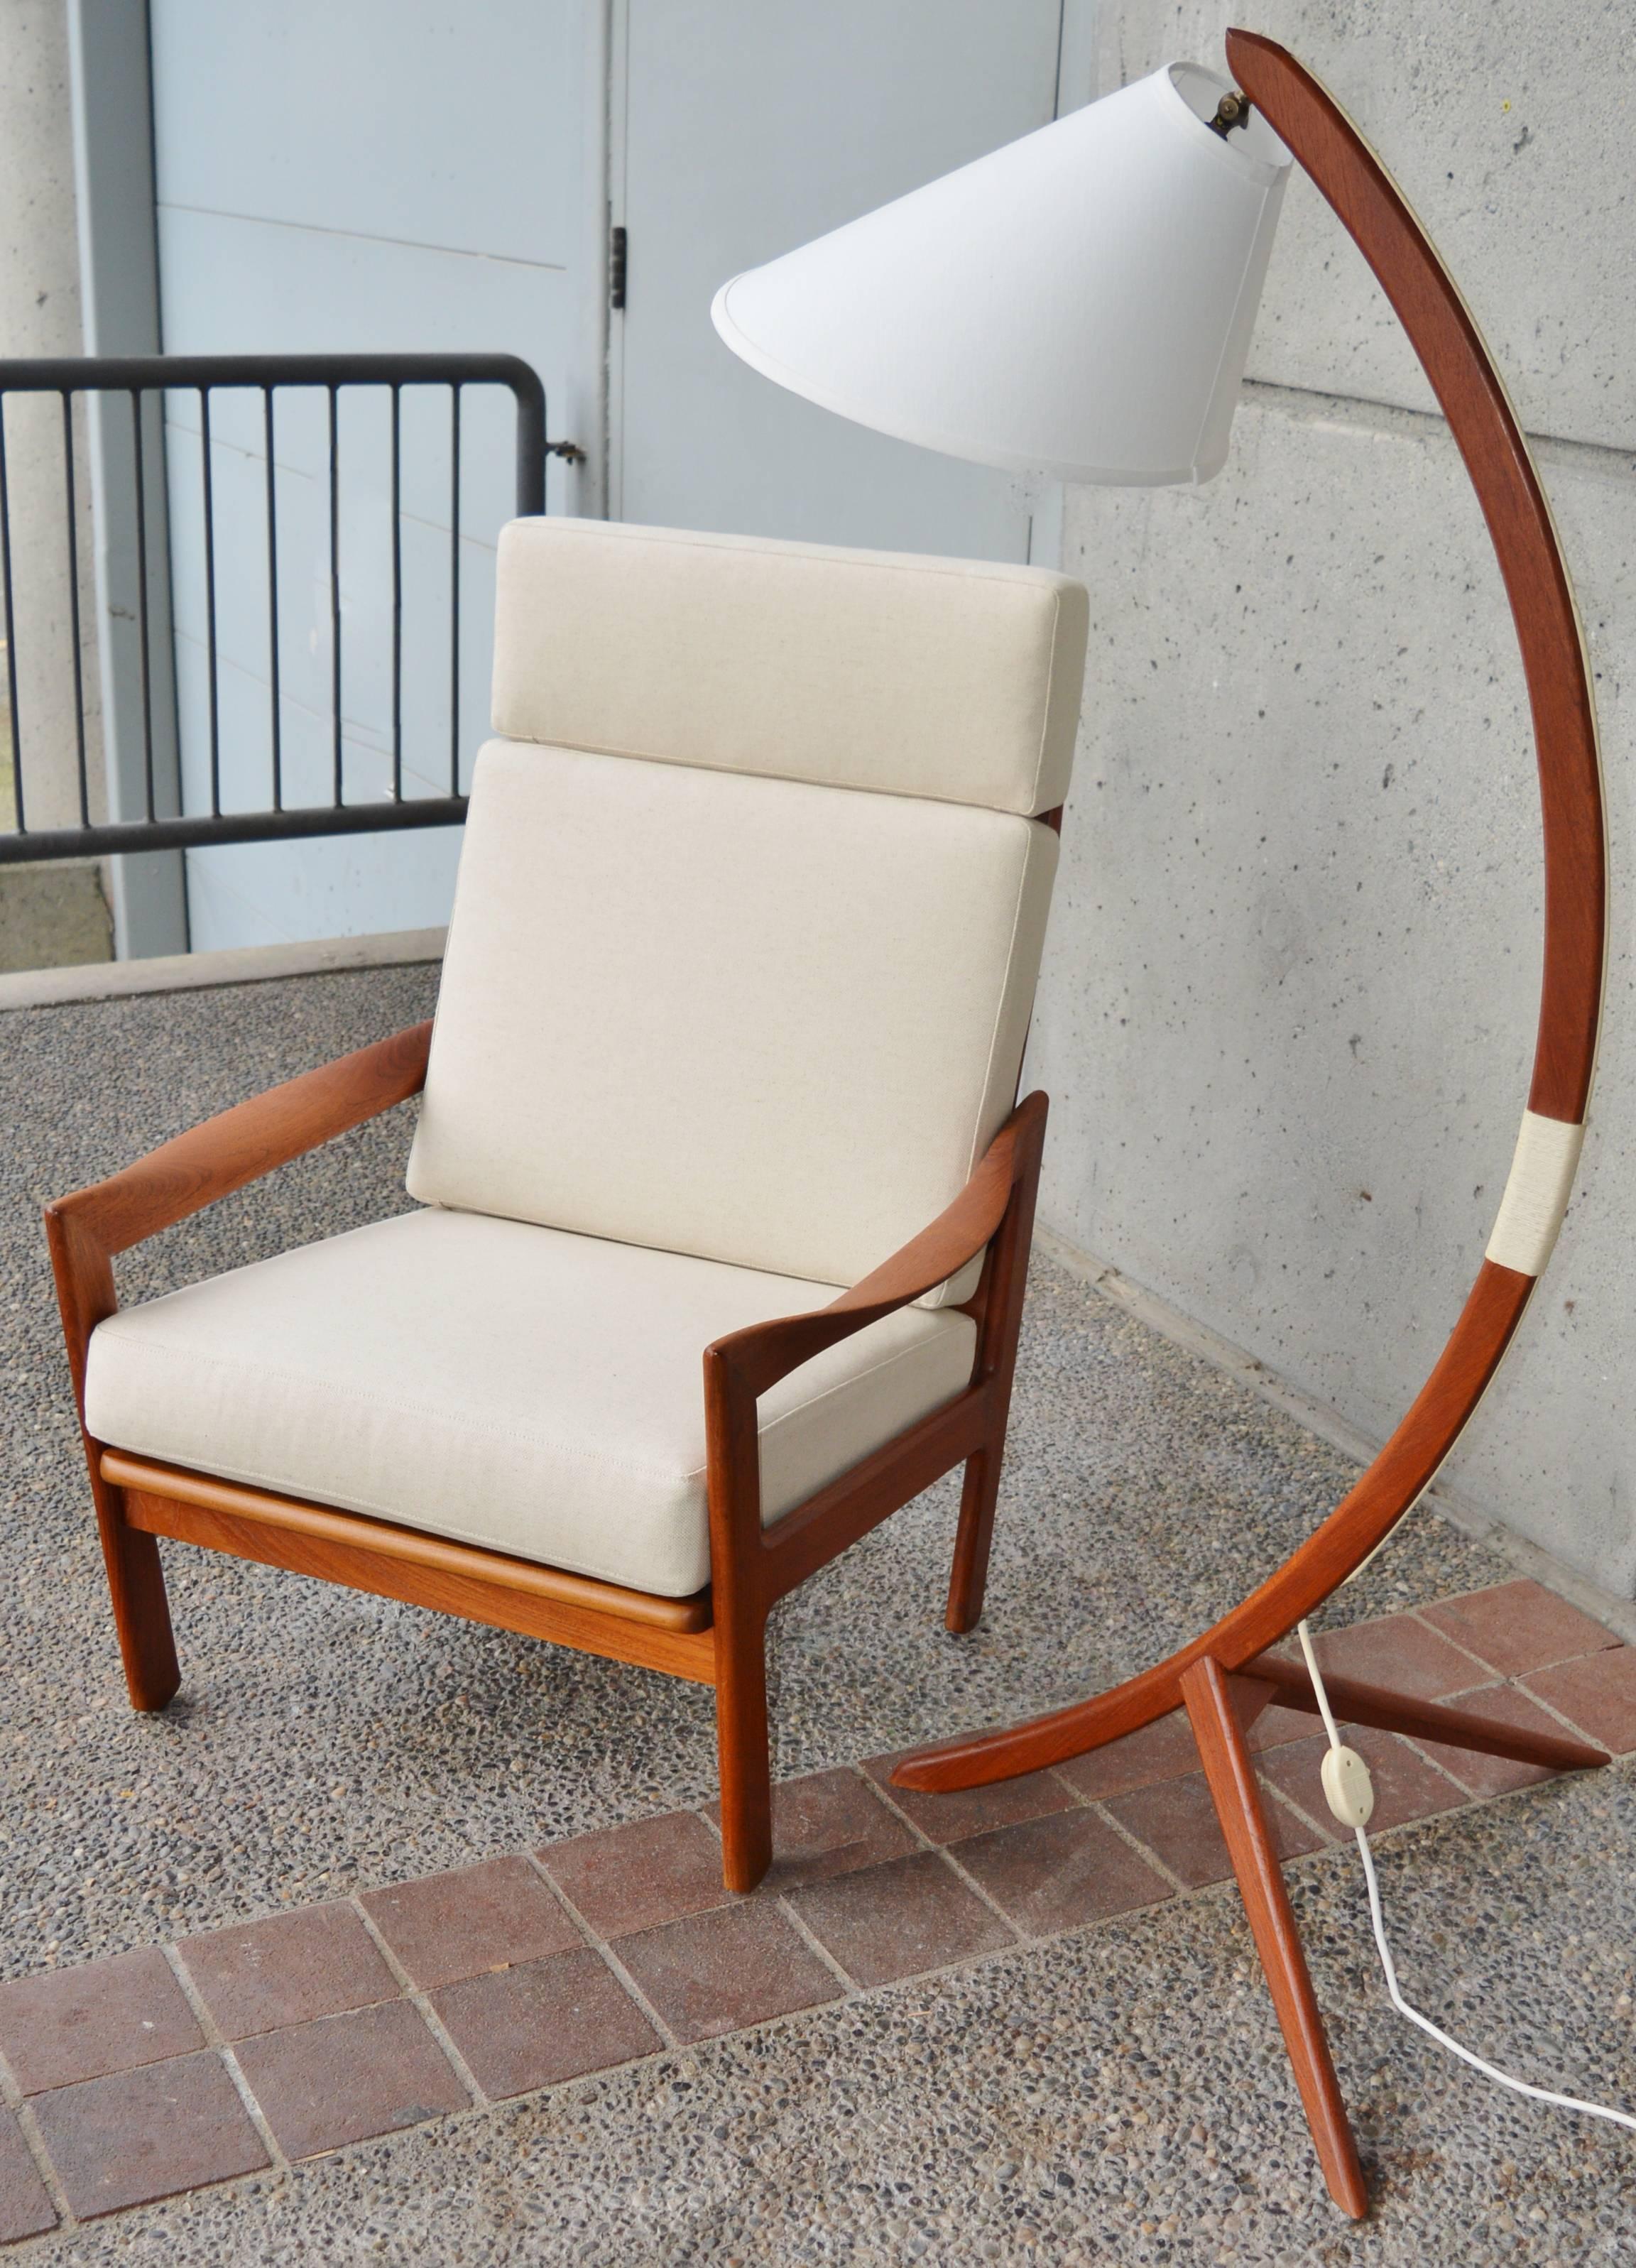 This iconic Danish Modern teak floor lamp in the style of Rispal is so dramatic and a real scene stealer! In awesome condition, the lamp is nick named the 